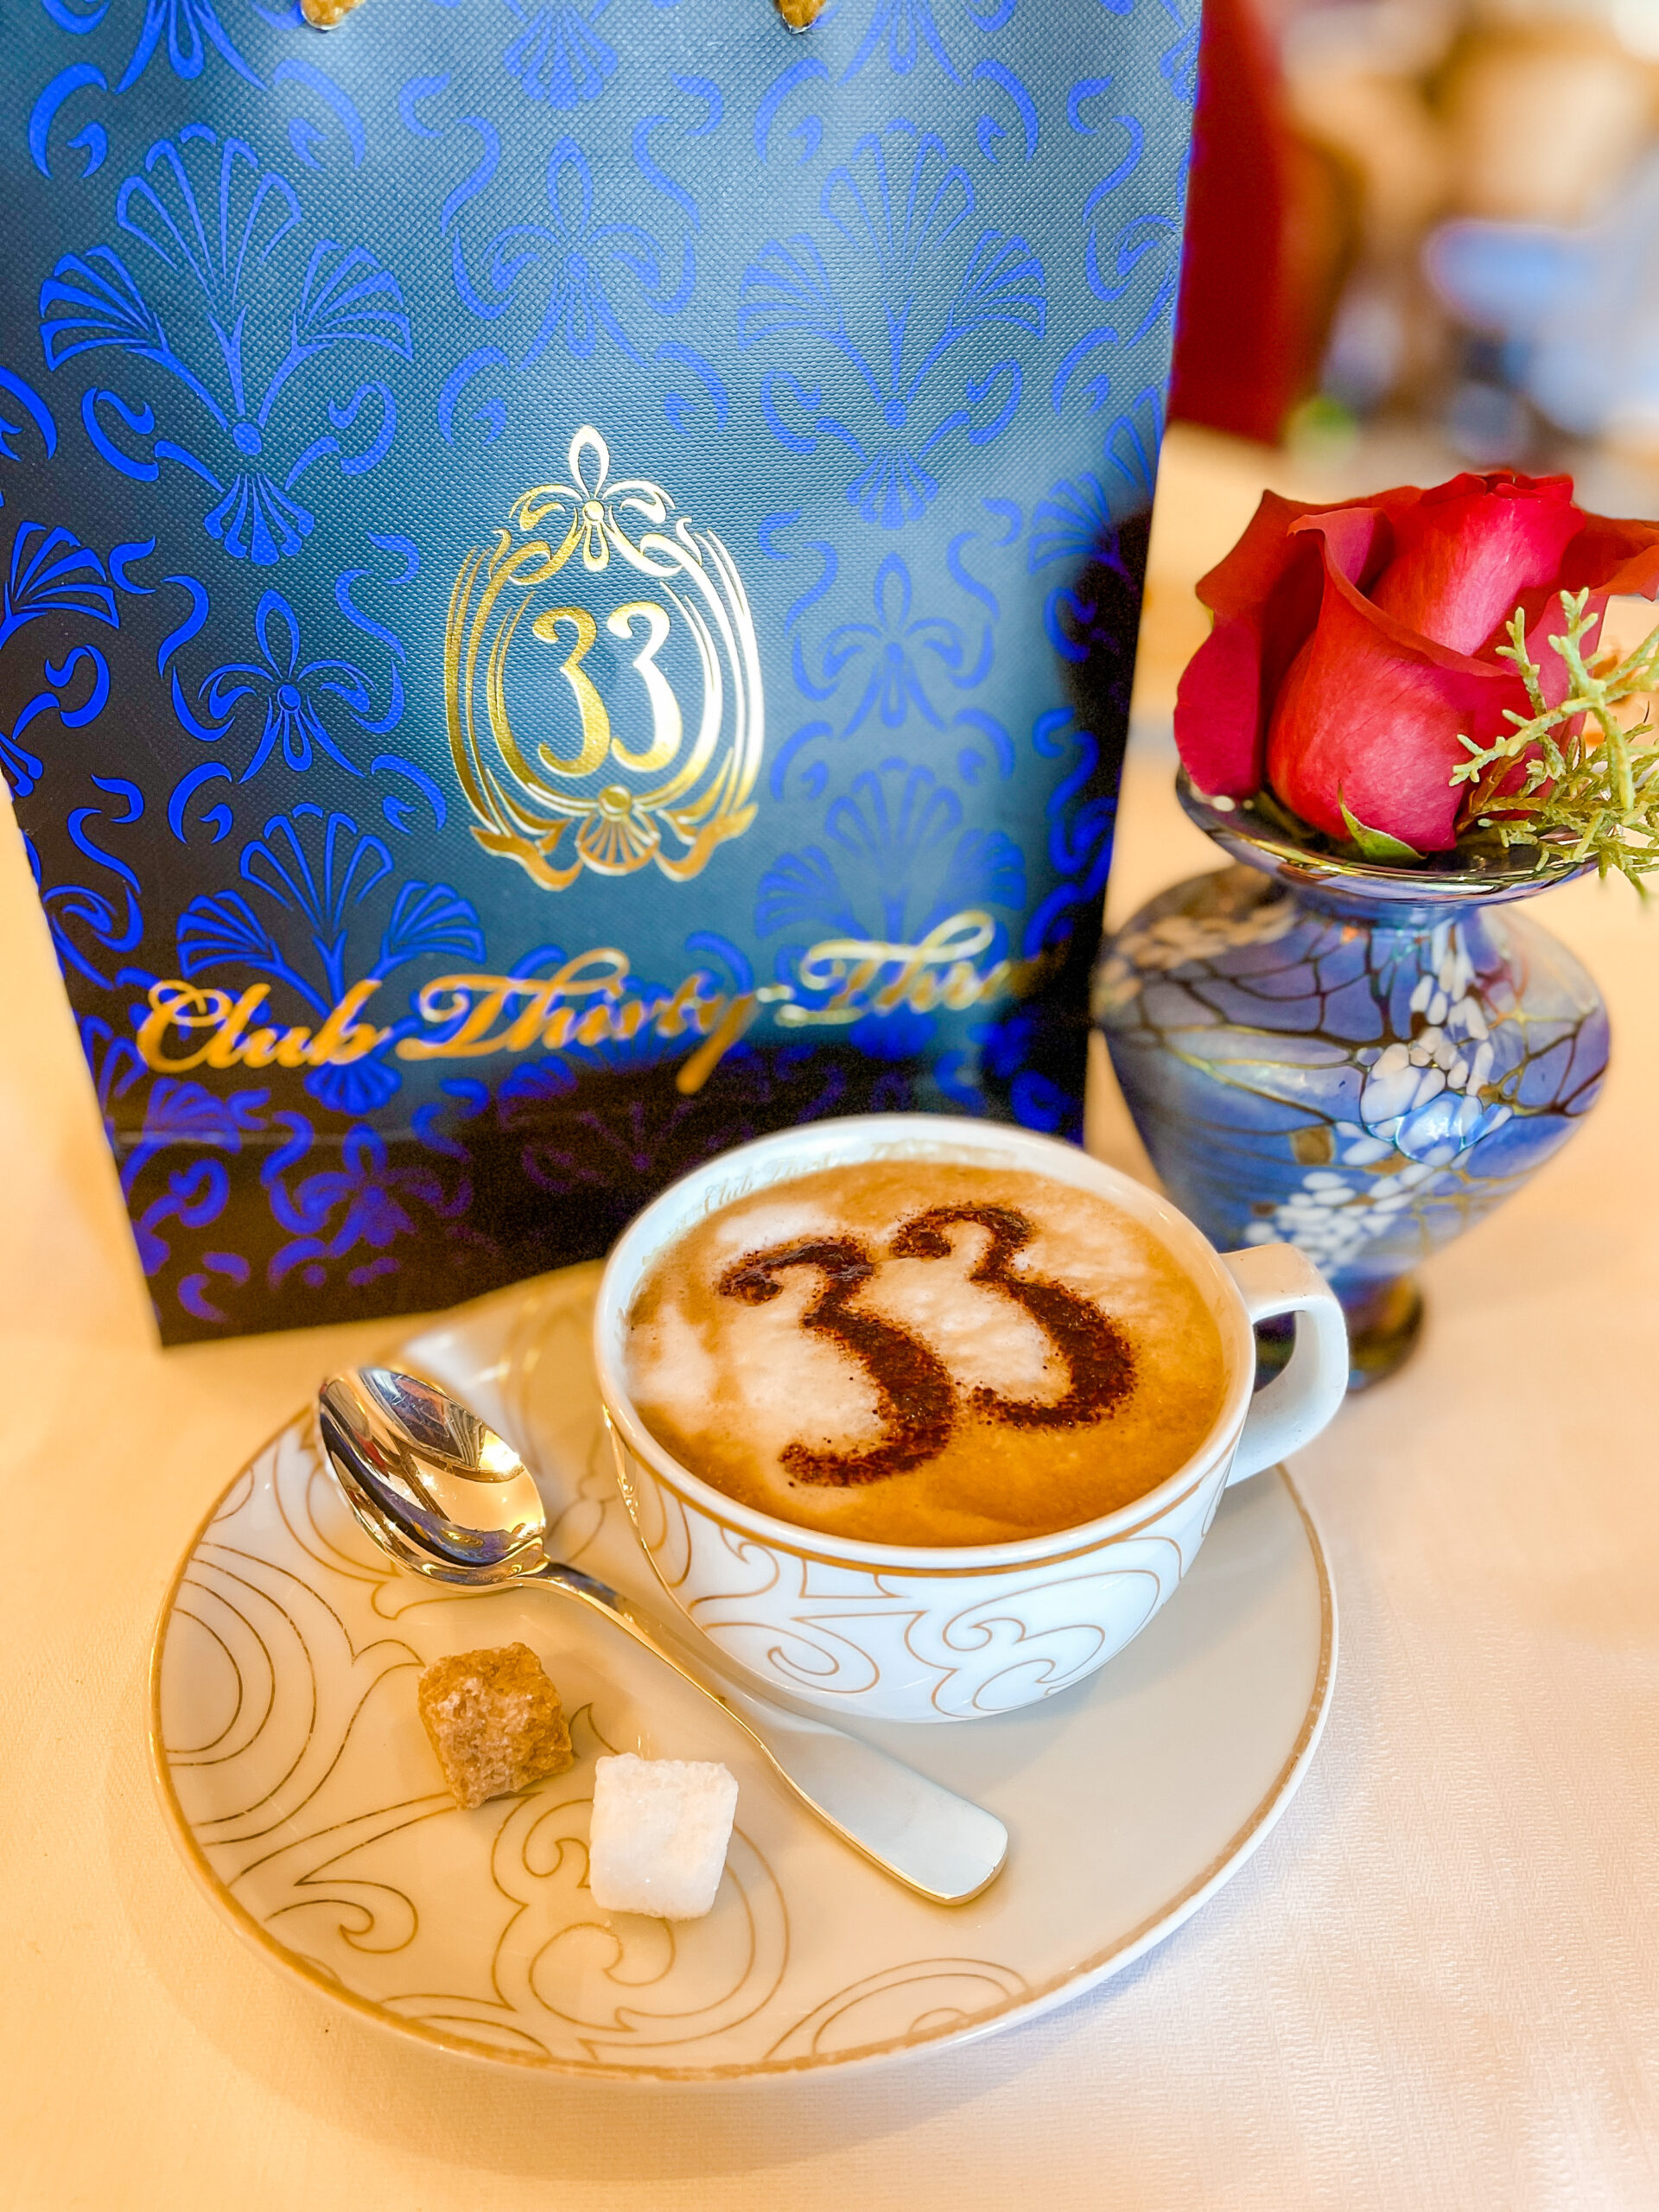 Club logo with Club 33 coffee and rose.